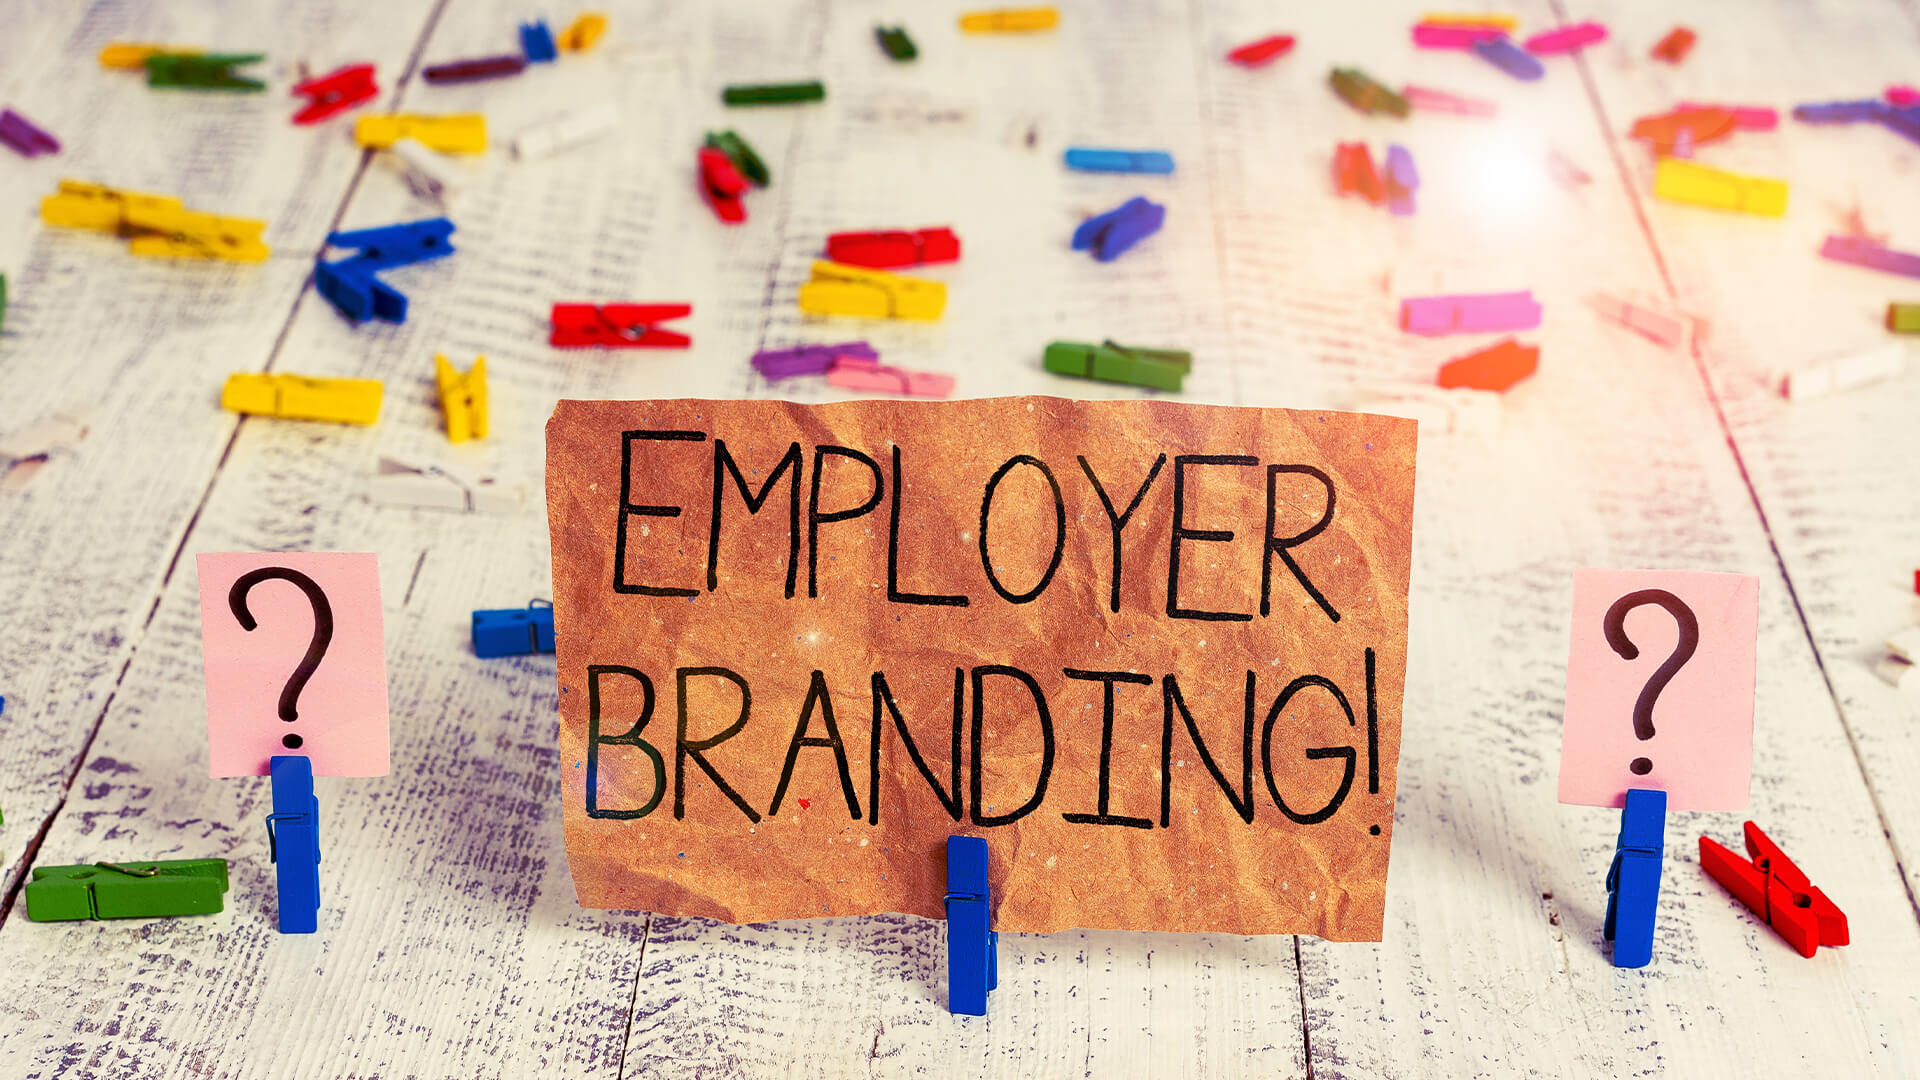 conceptualizing and researching employer branding